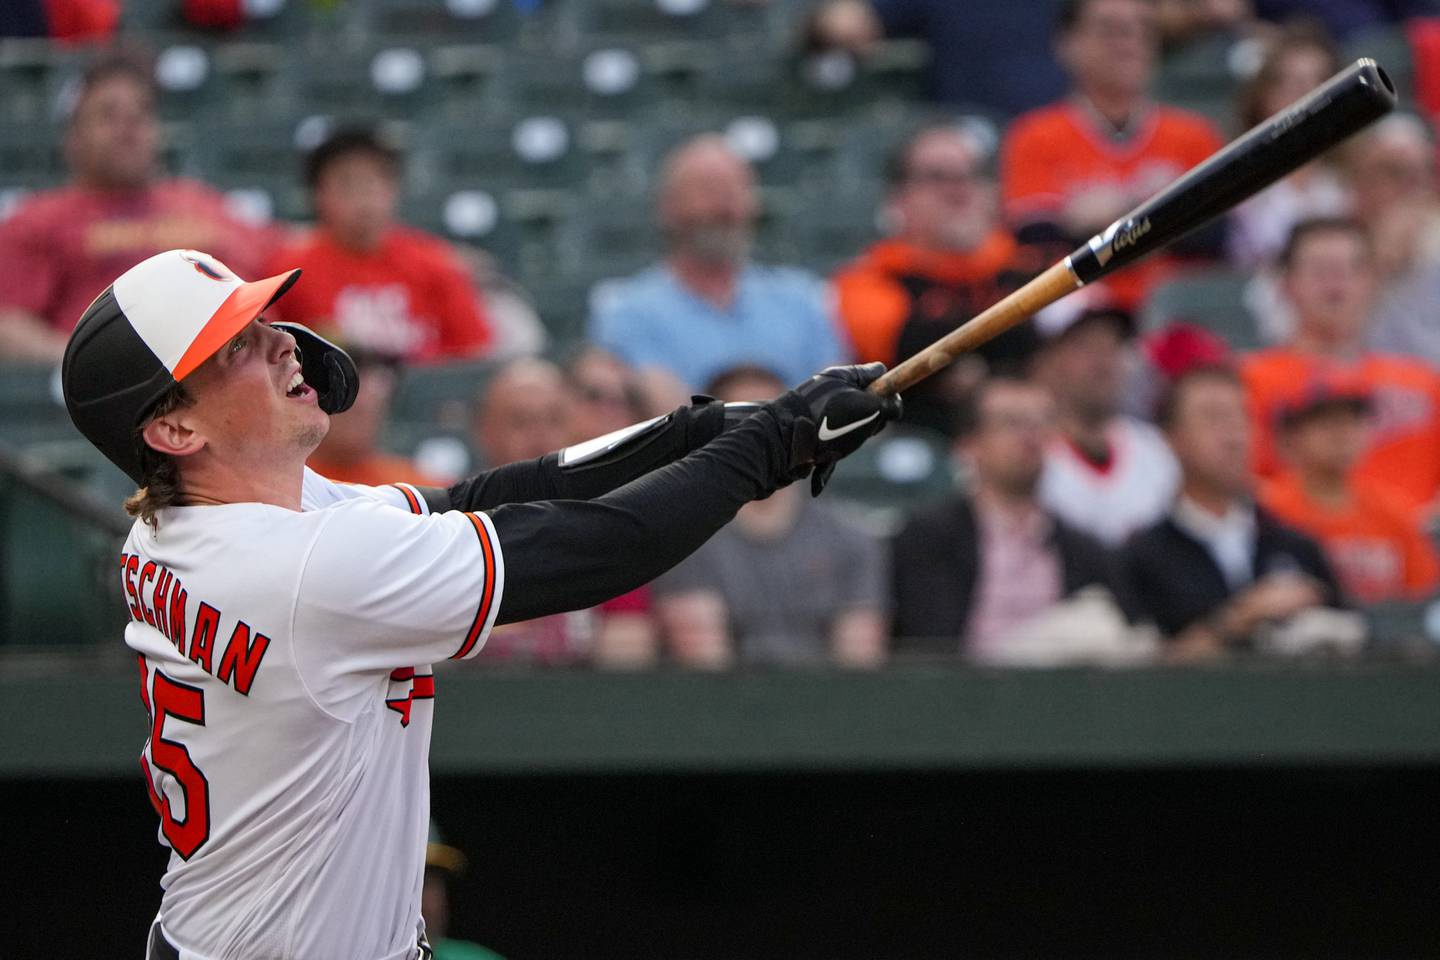 Baltimore Orioles catcher Adley Rutschman (35) swings in a baseball game against the Oakland Athletics at Camden Yards on Tuesday, April 11. The Orioles beat the Athletics, 12-8, in the second game of the series.